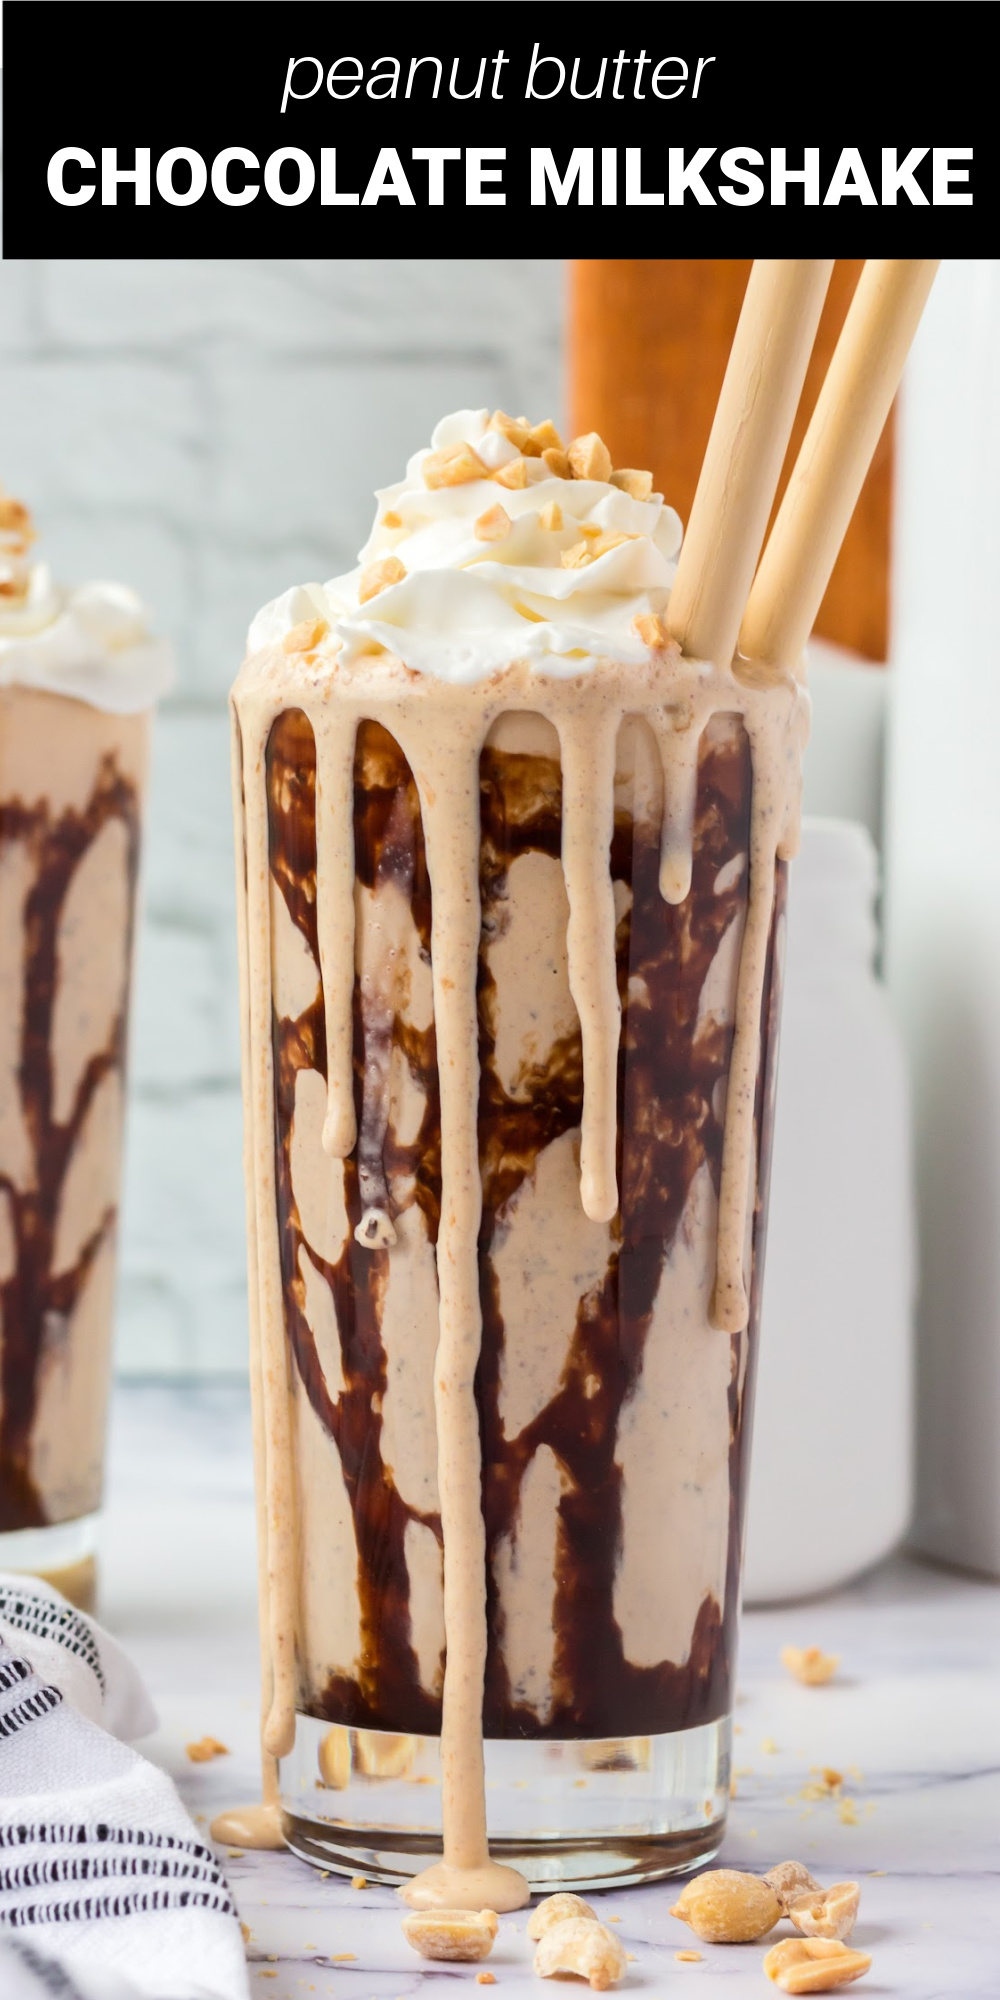 Your search for the absolute best Peanut Butter Chocolate Milkshake recipe is over. With just 4 ingredients, you’ll have the most ultra-rich, cool and refreshing treat that’s so much better than any ice cream shop! 